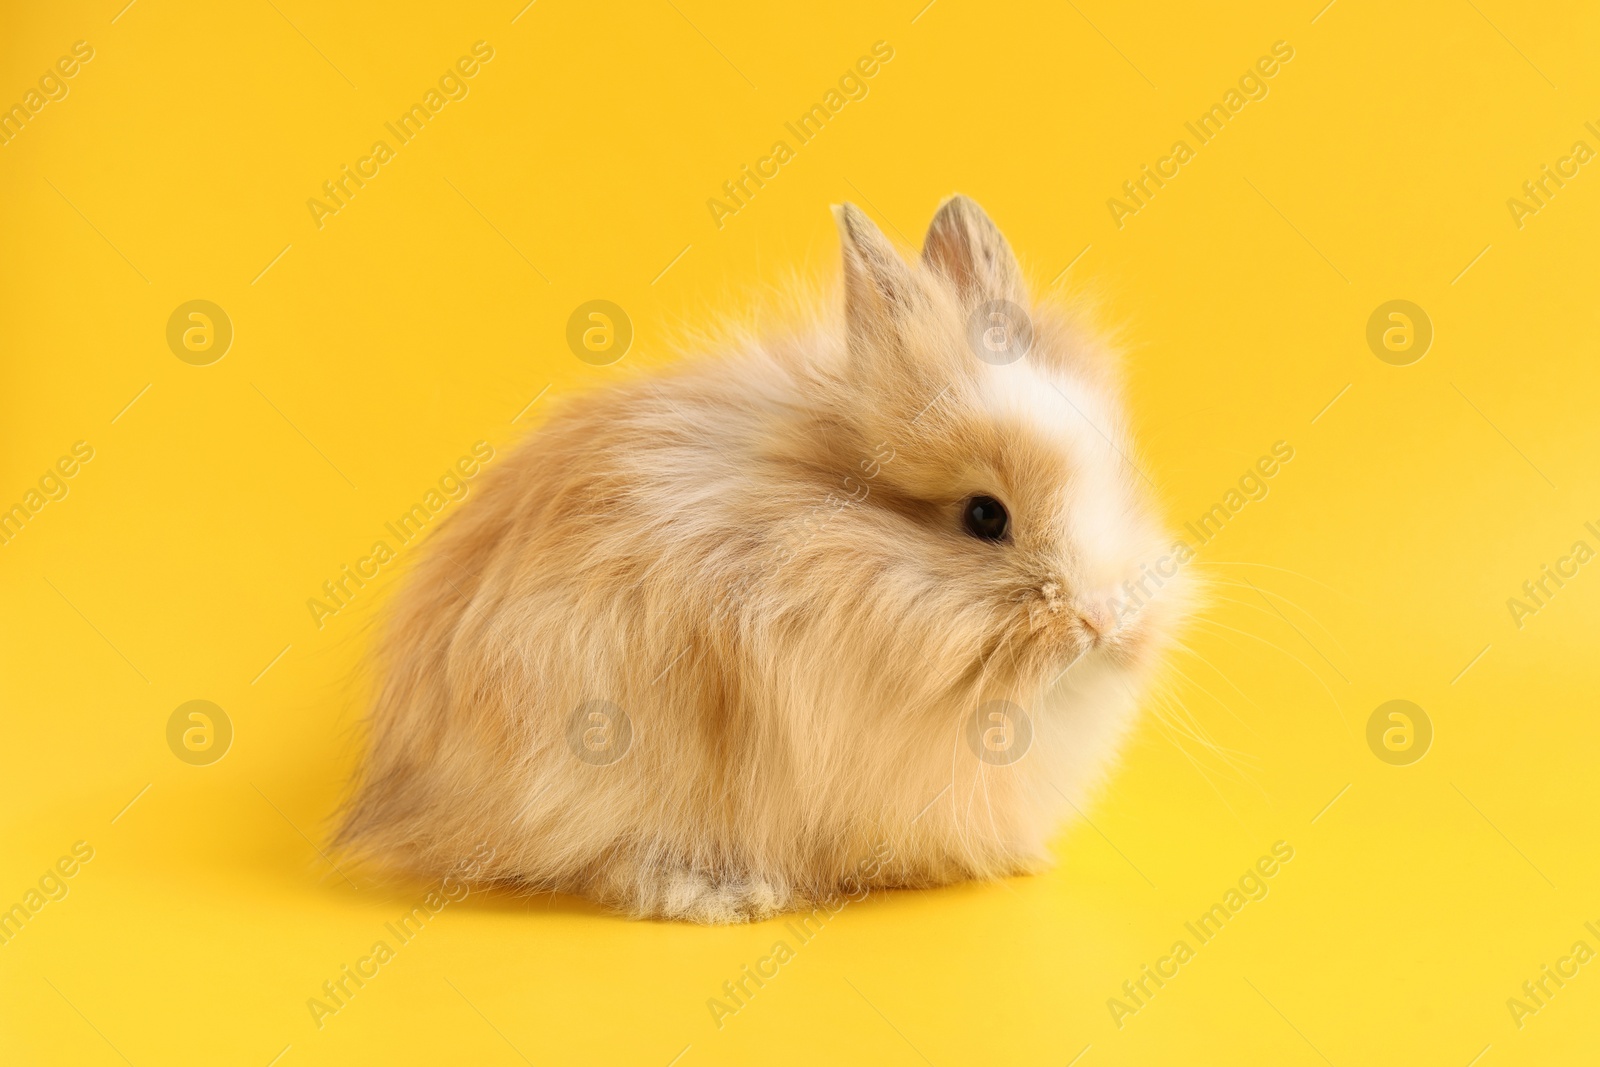 Photo of Cute little rabbit on yellow background. Adorable pet